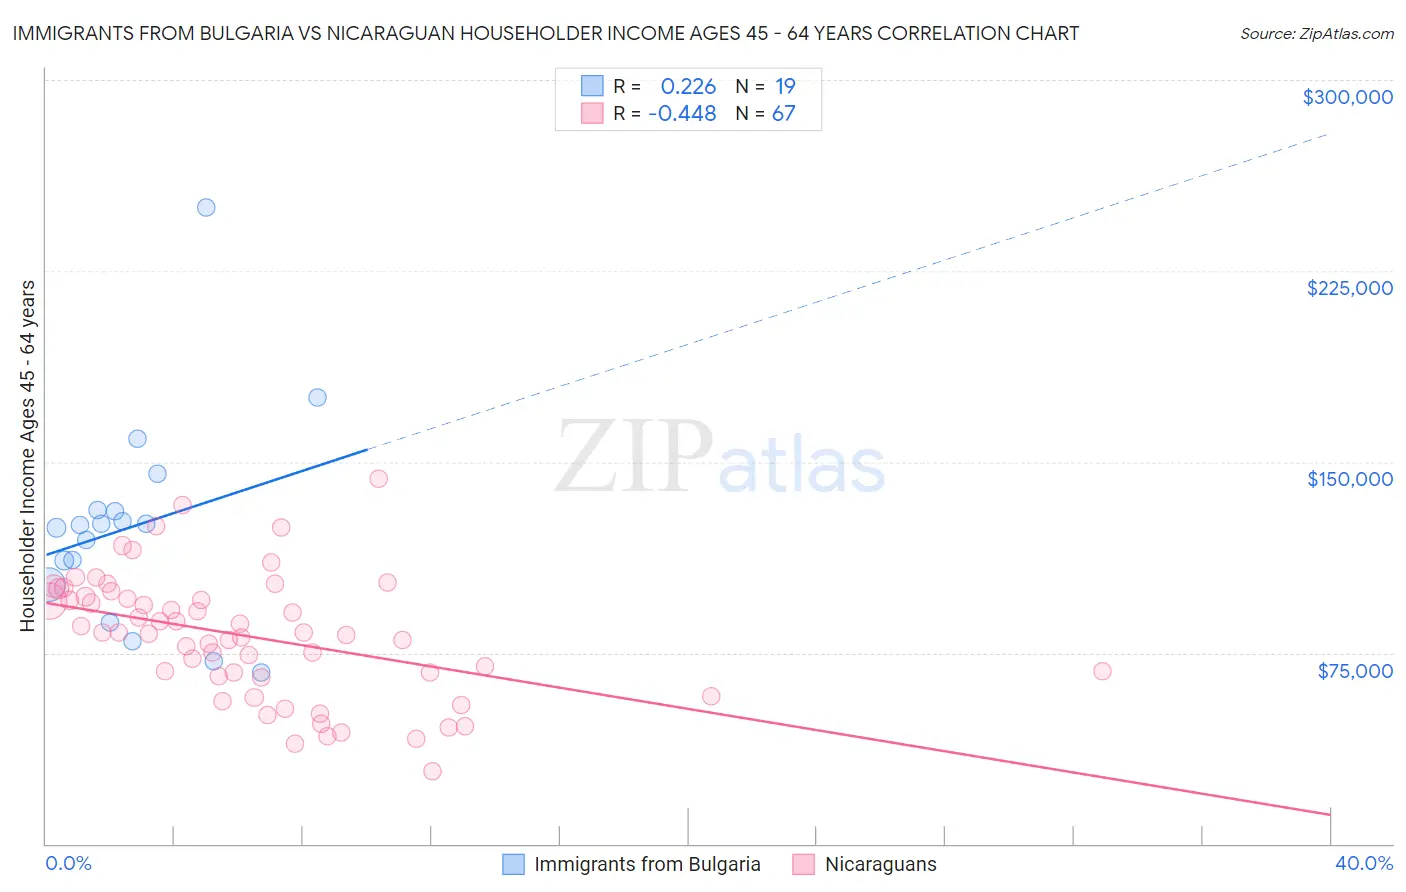 Immigrants from Bulgaria vs Nicaraguan Householder Income Ages 45 - 64 years